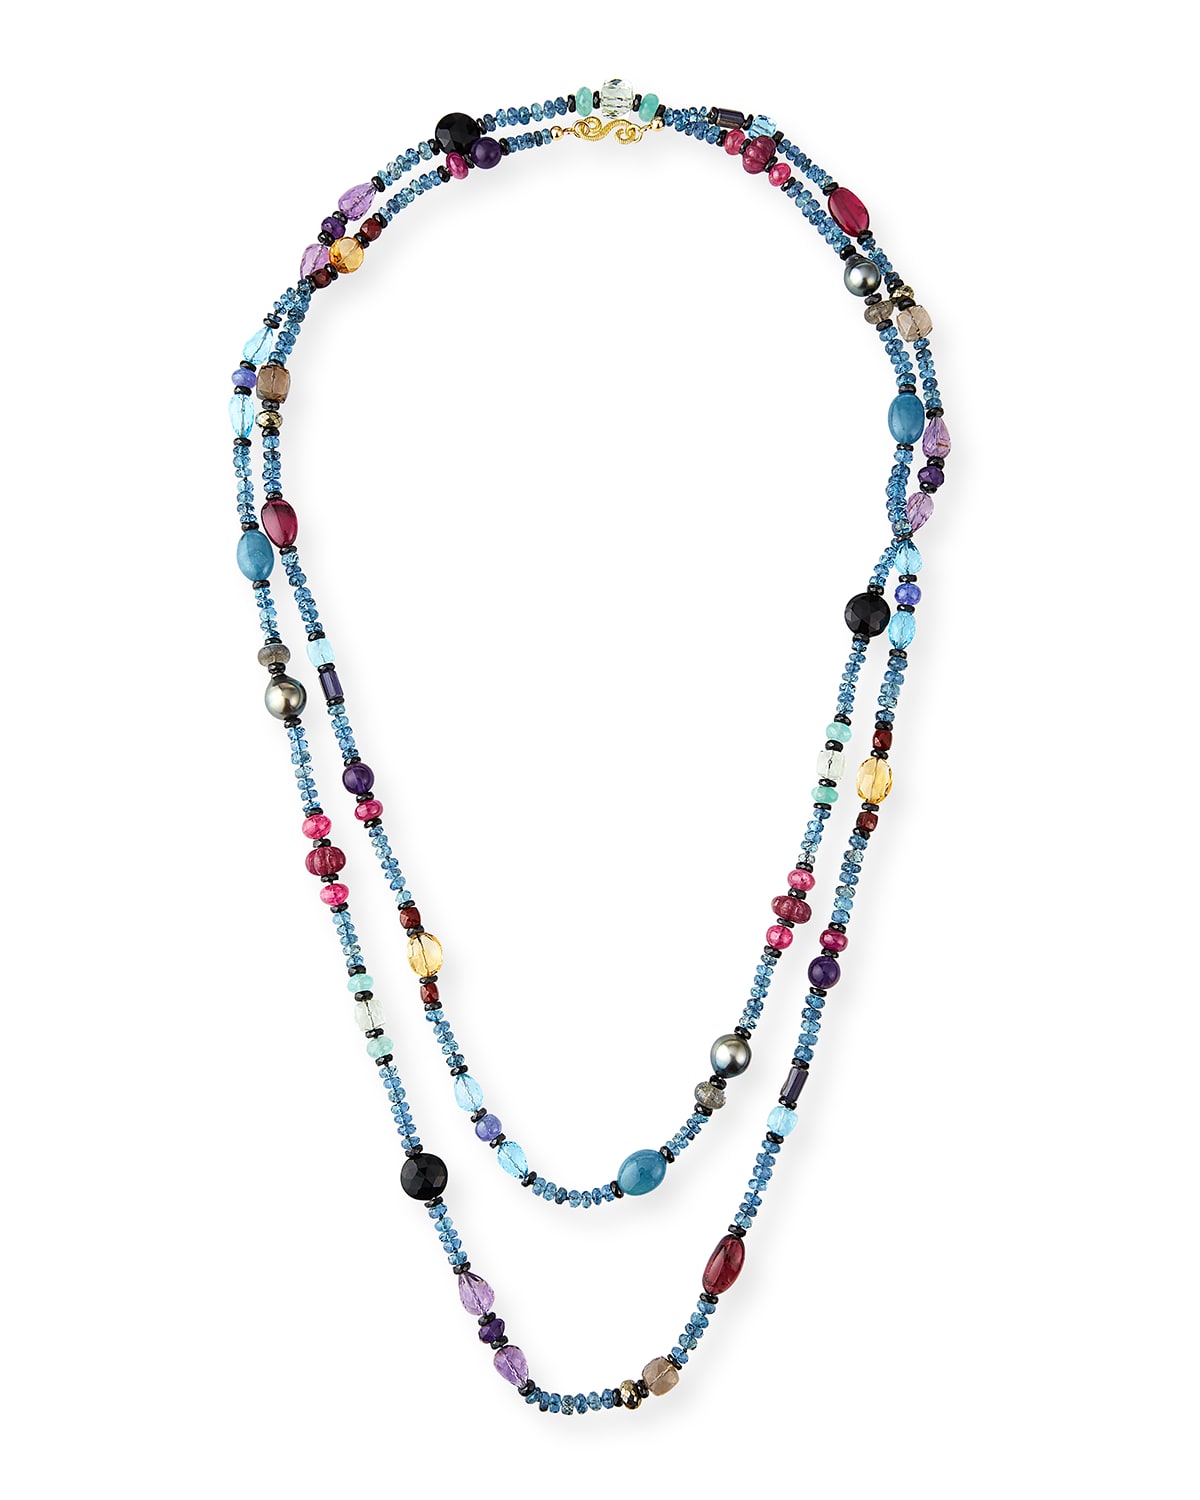 Extra-Long Mixed Gemstone Necklace, 60"L